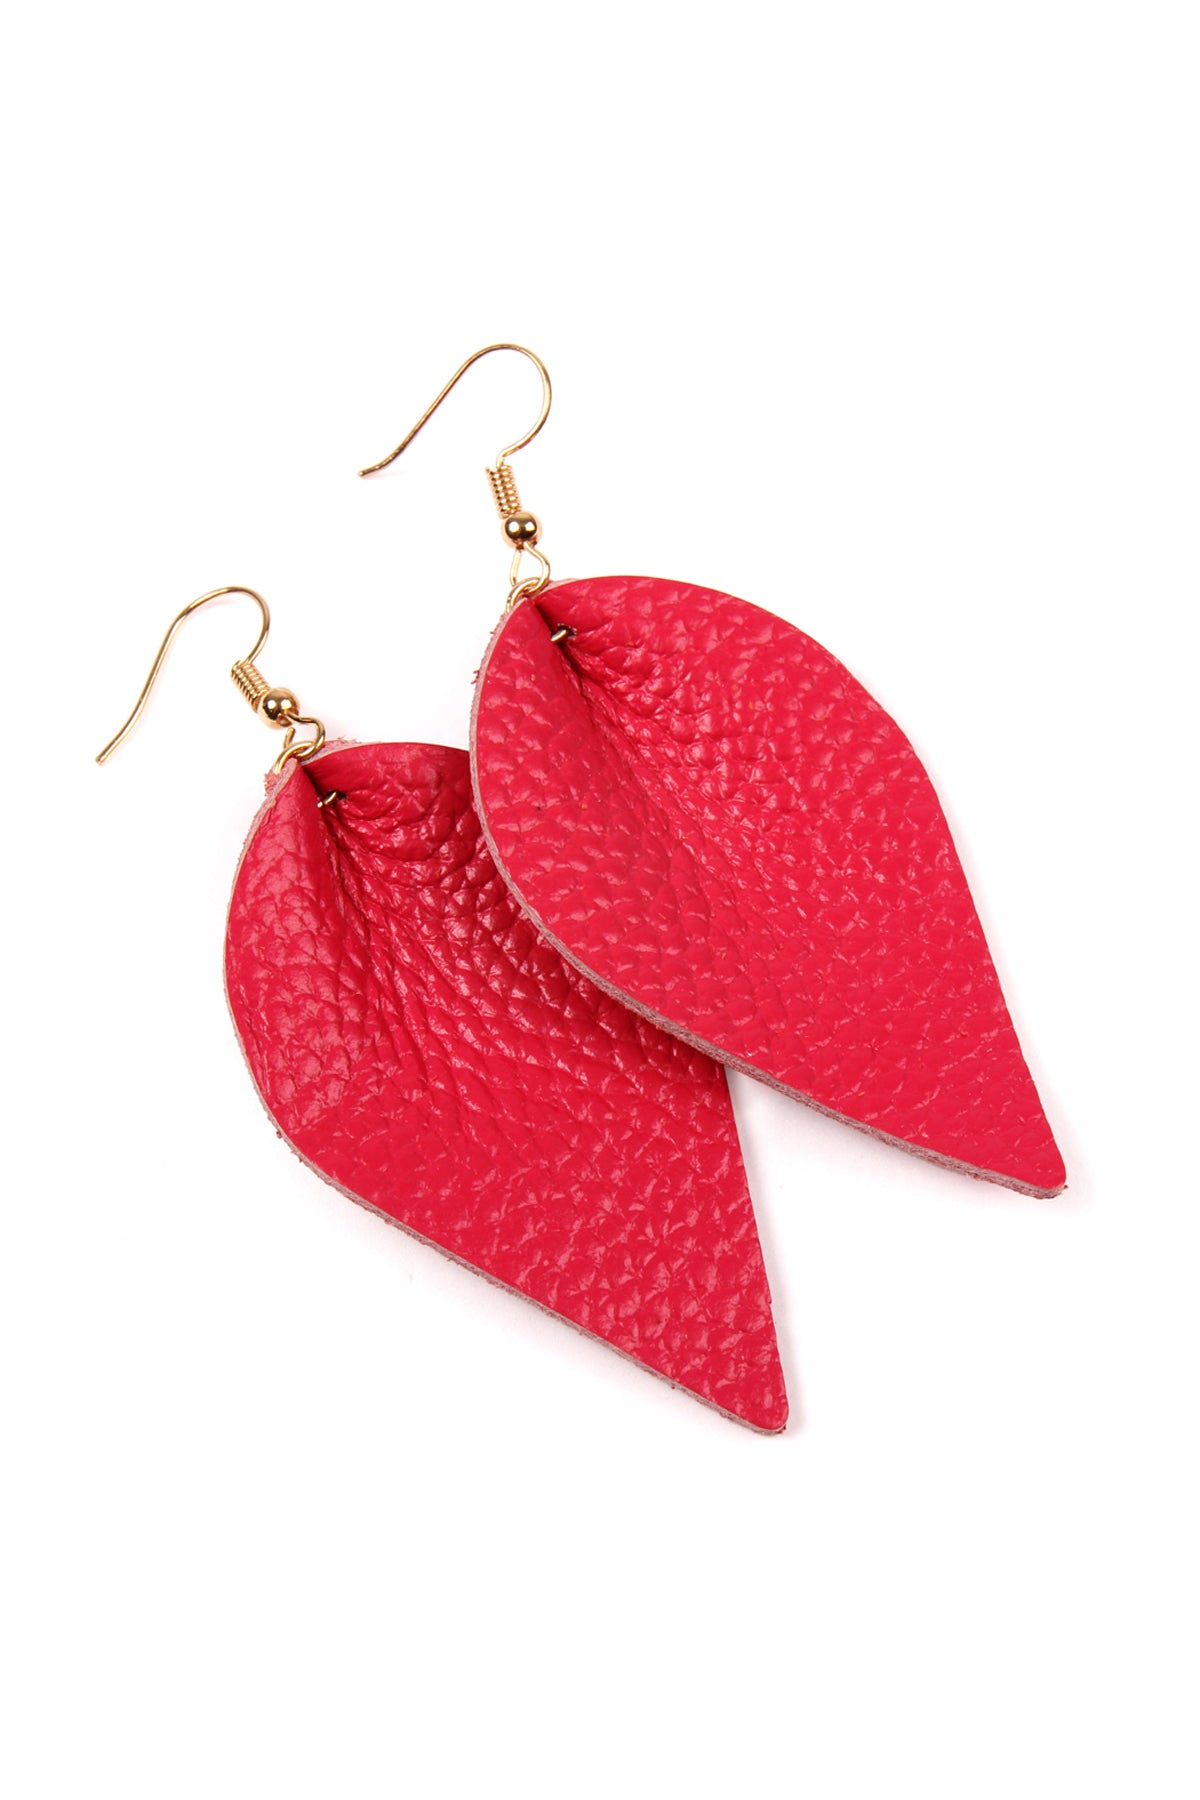 TEARDROP SHAPE PINCHED LEATHER EARRINGS/6PAIRS